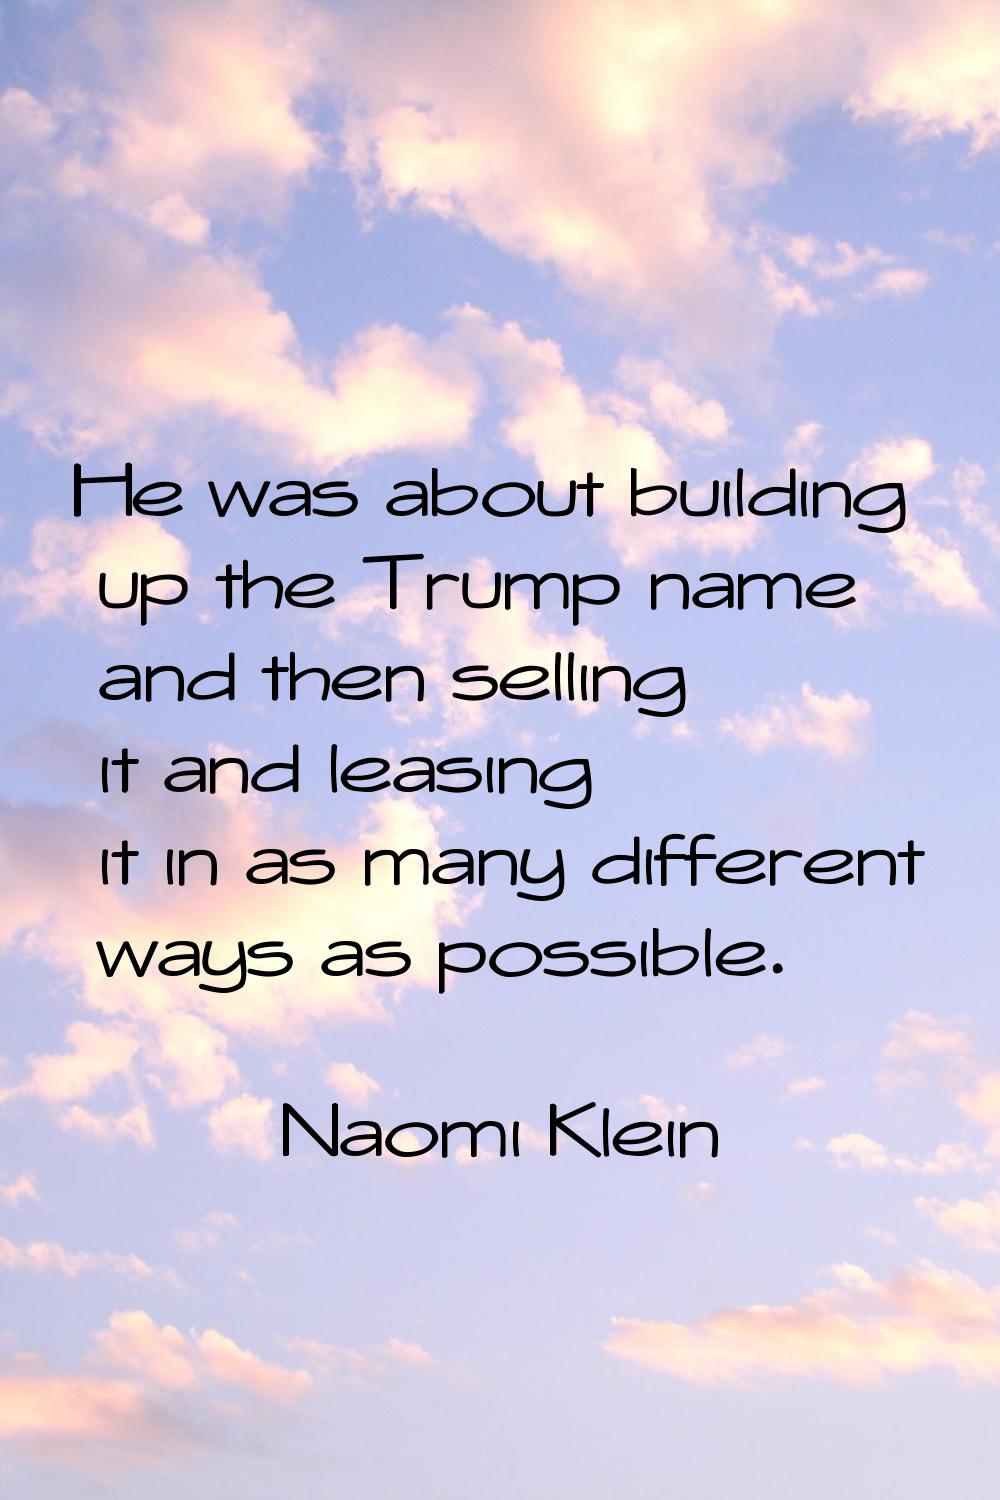 He was about building up the Trump name and then selling it and leasing it in as many different way